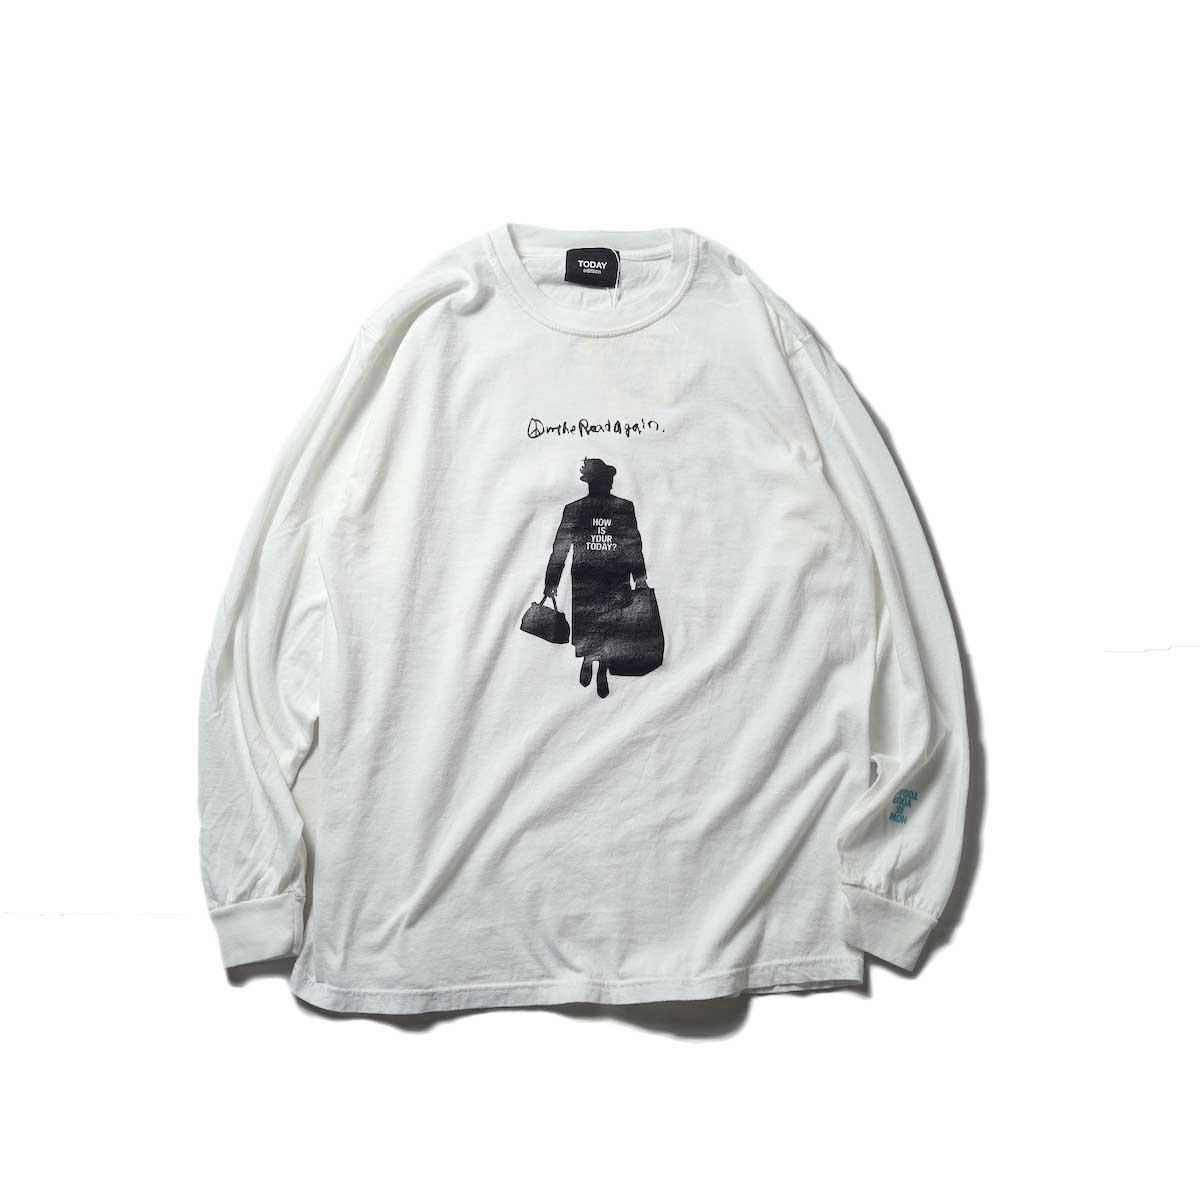 TODAY edition / Sllhouette #2 L/S Tee (White)